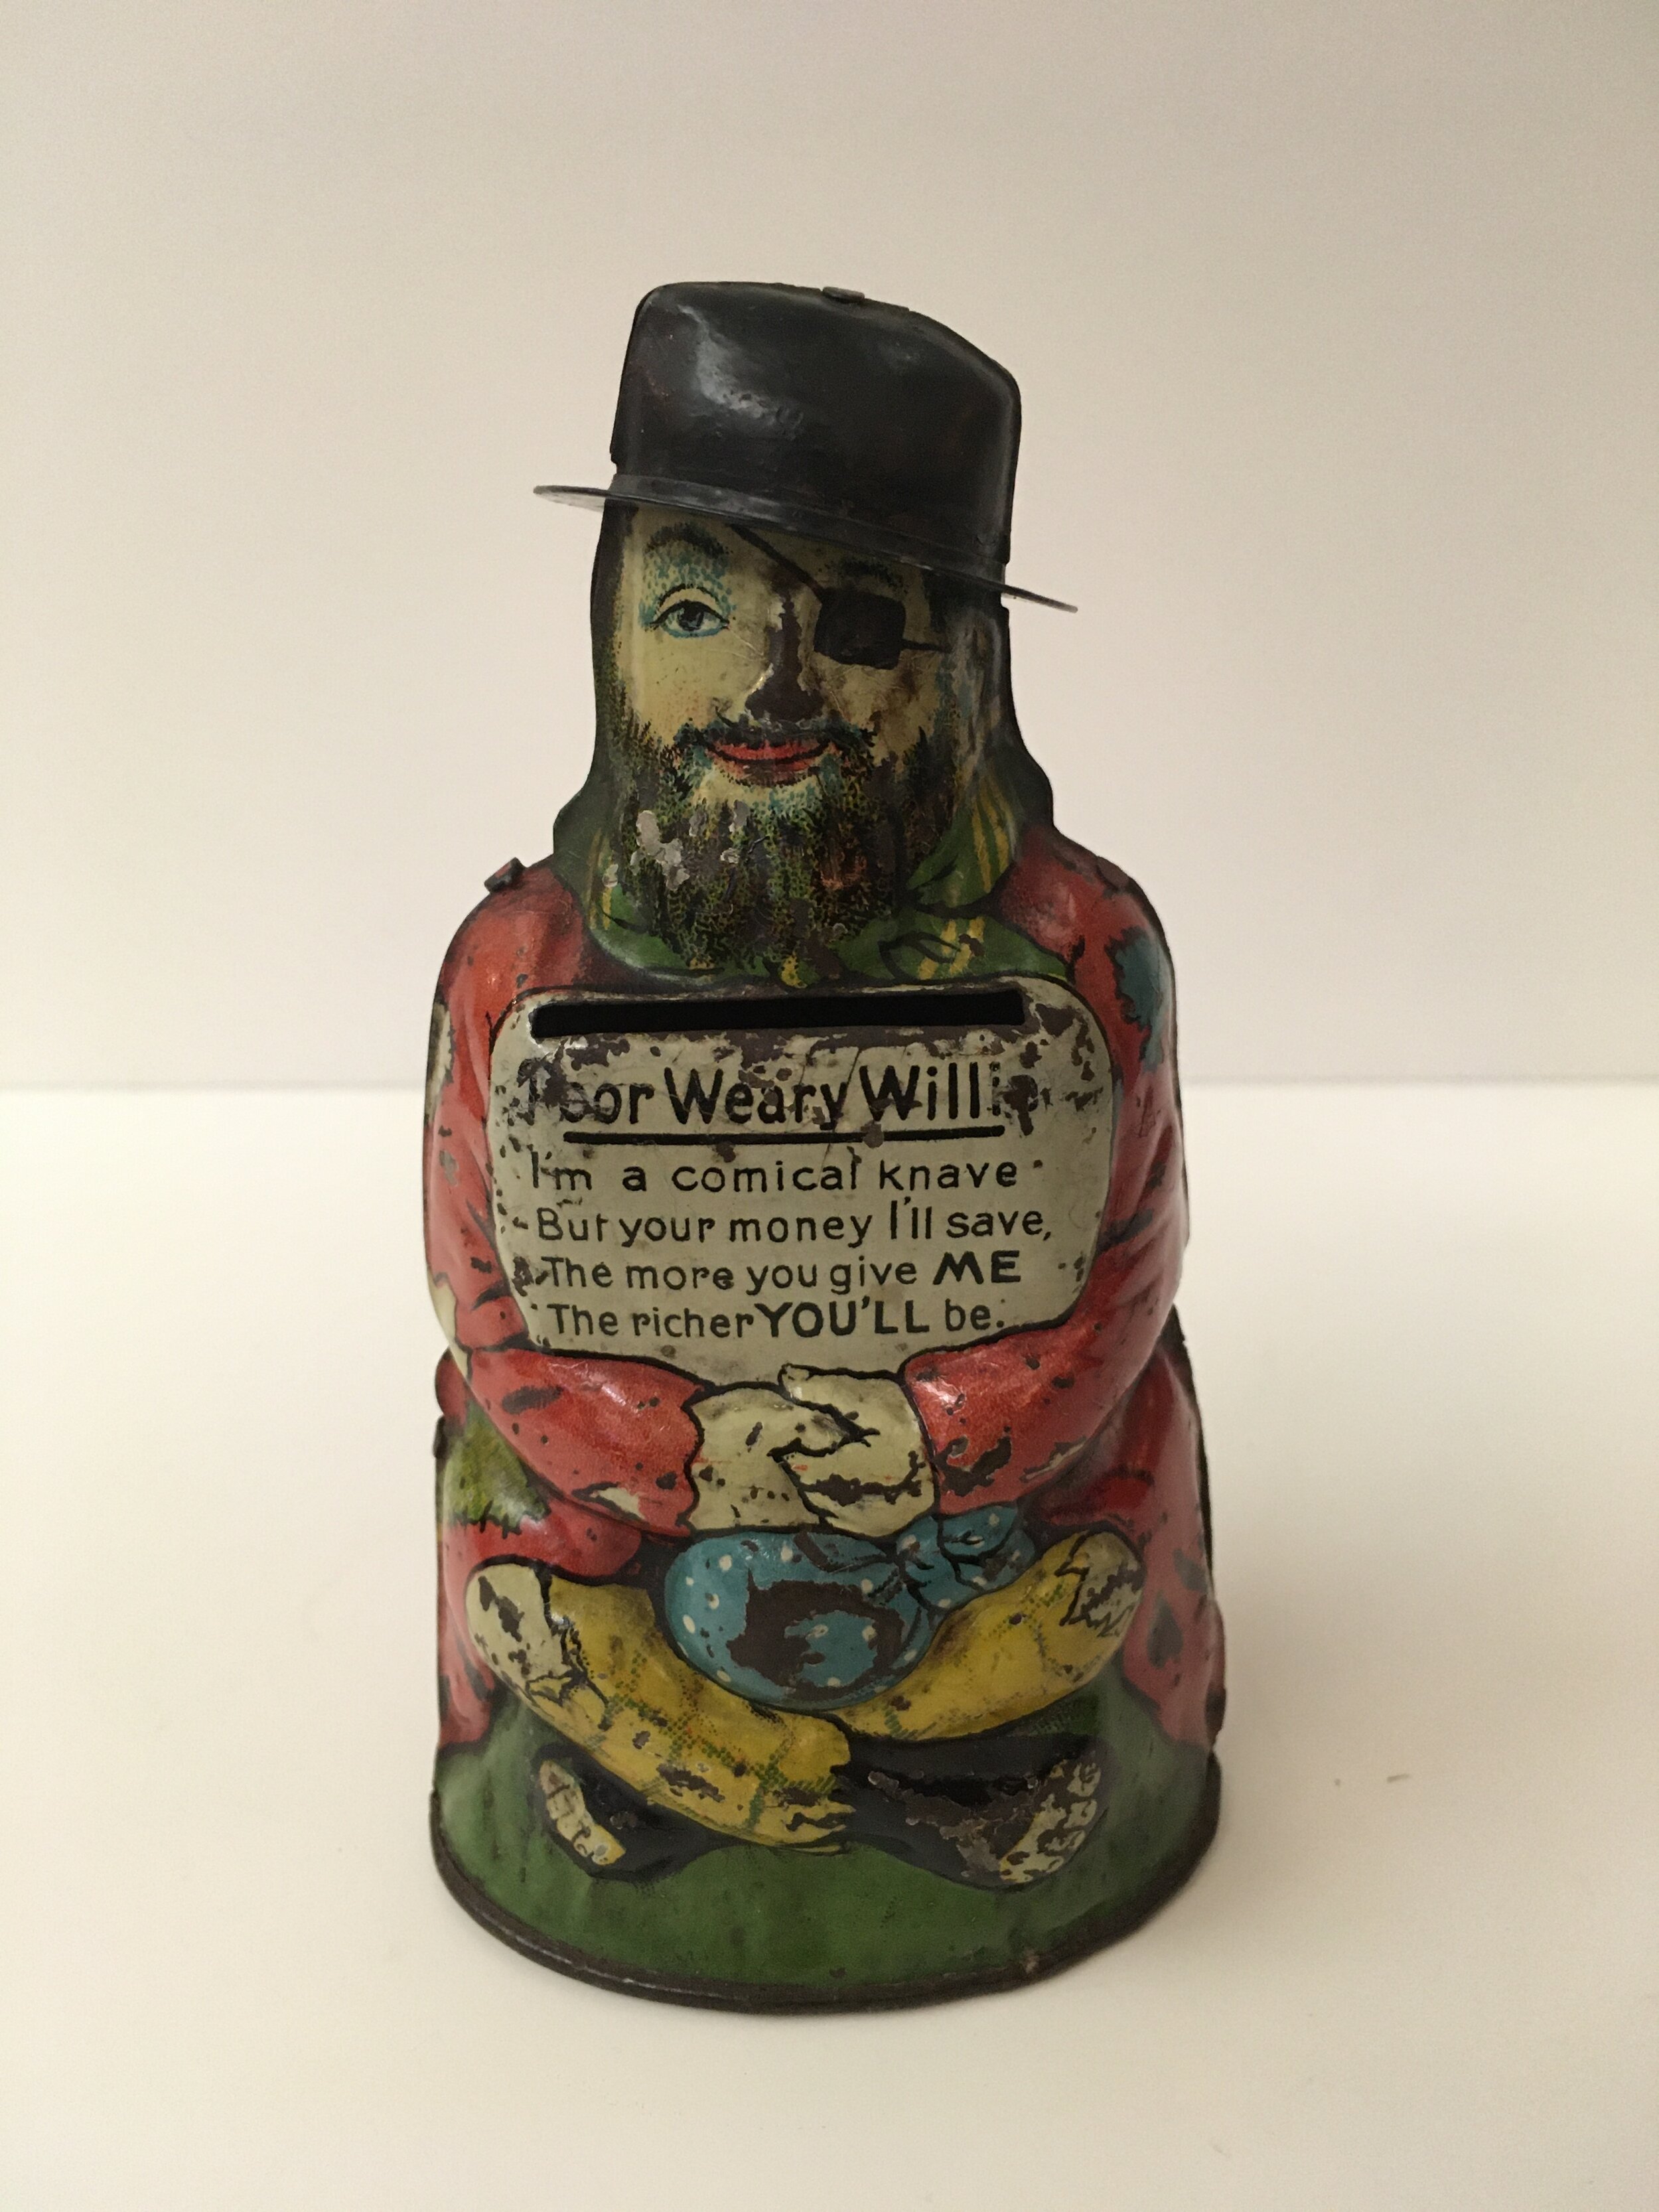 Antique Poor Weary Willie Tin Coin Bank